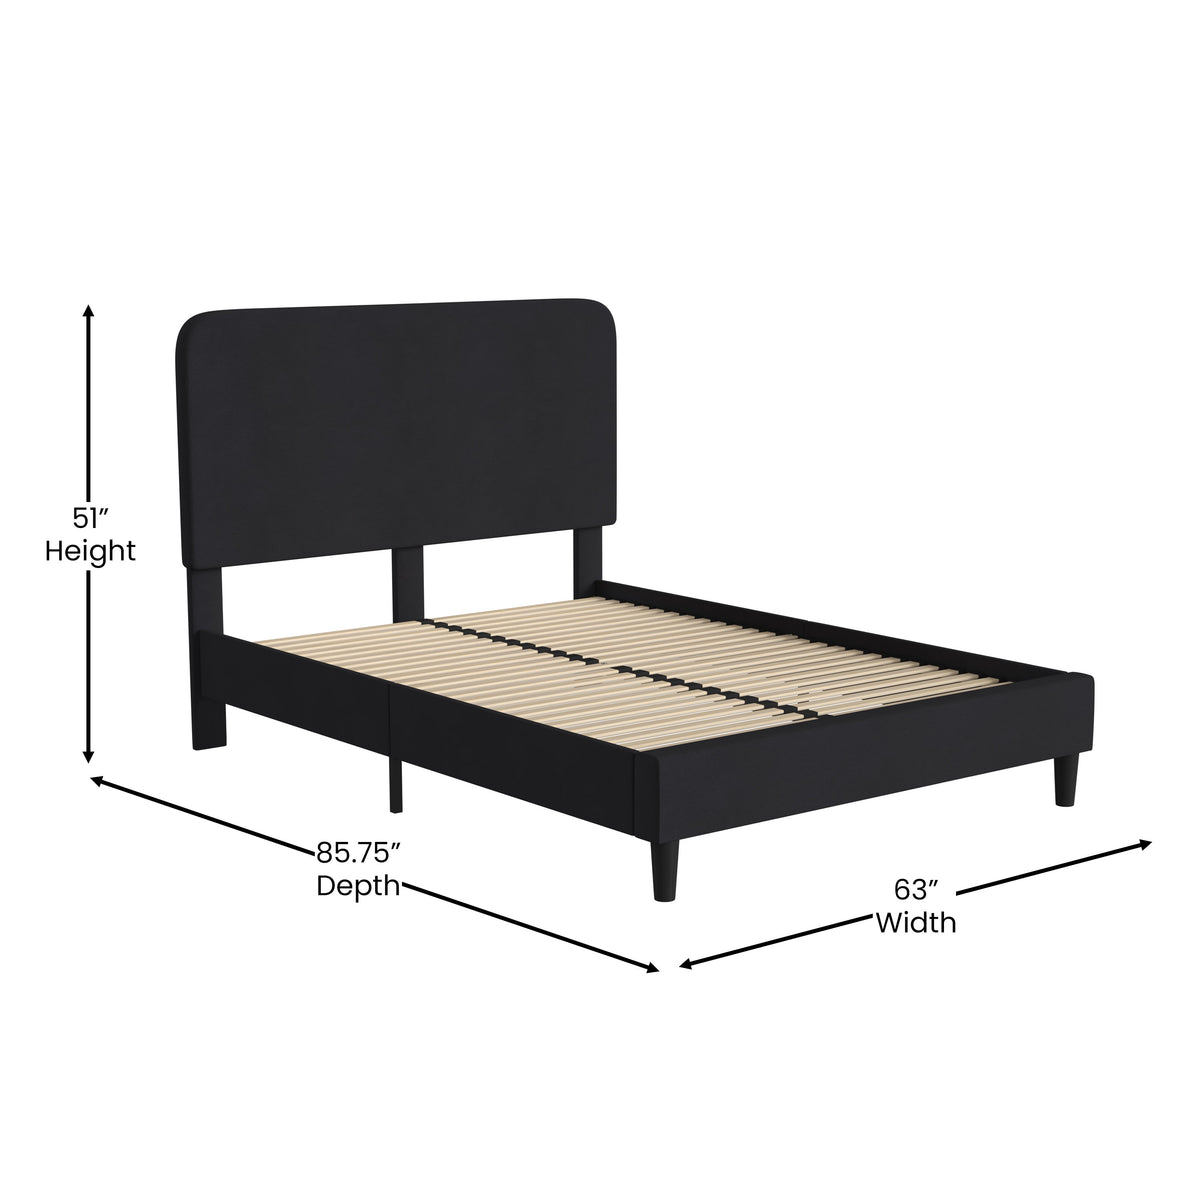 Charcoal,Queen |#| Platform Bed with Headboard-Black Fabric Upholstery-Queen-No Foundation Needed